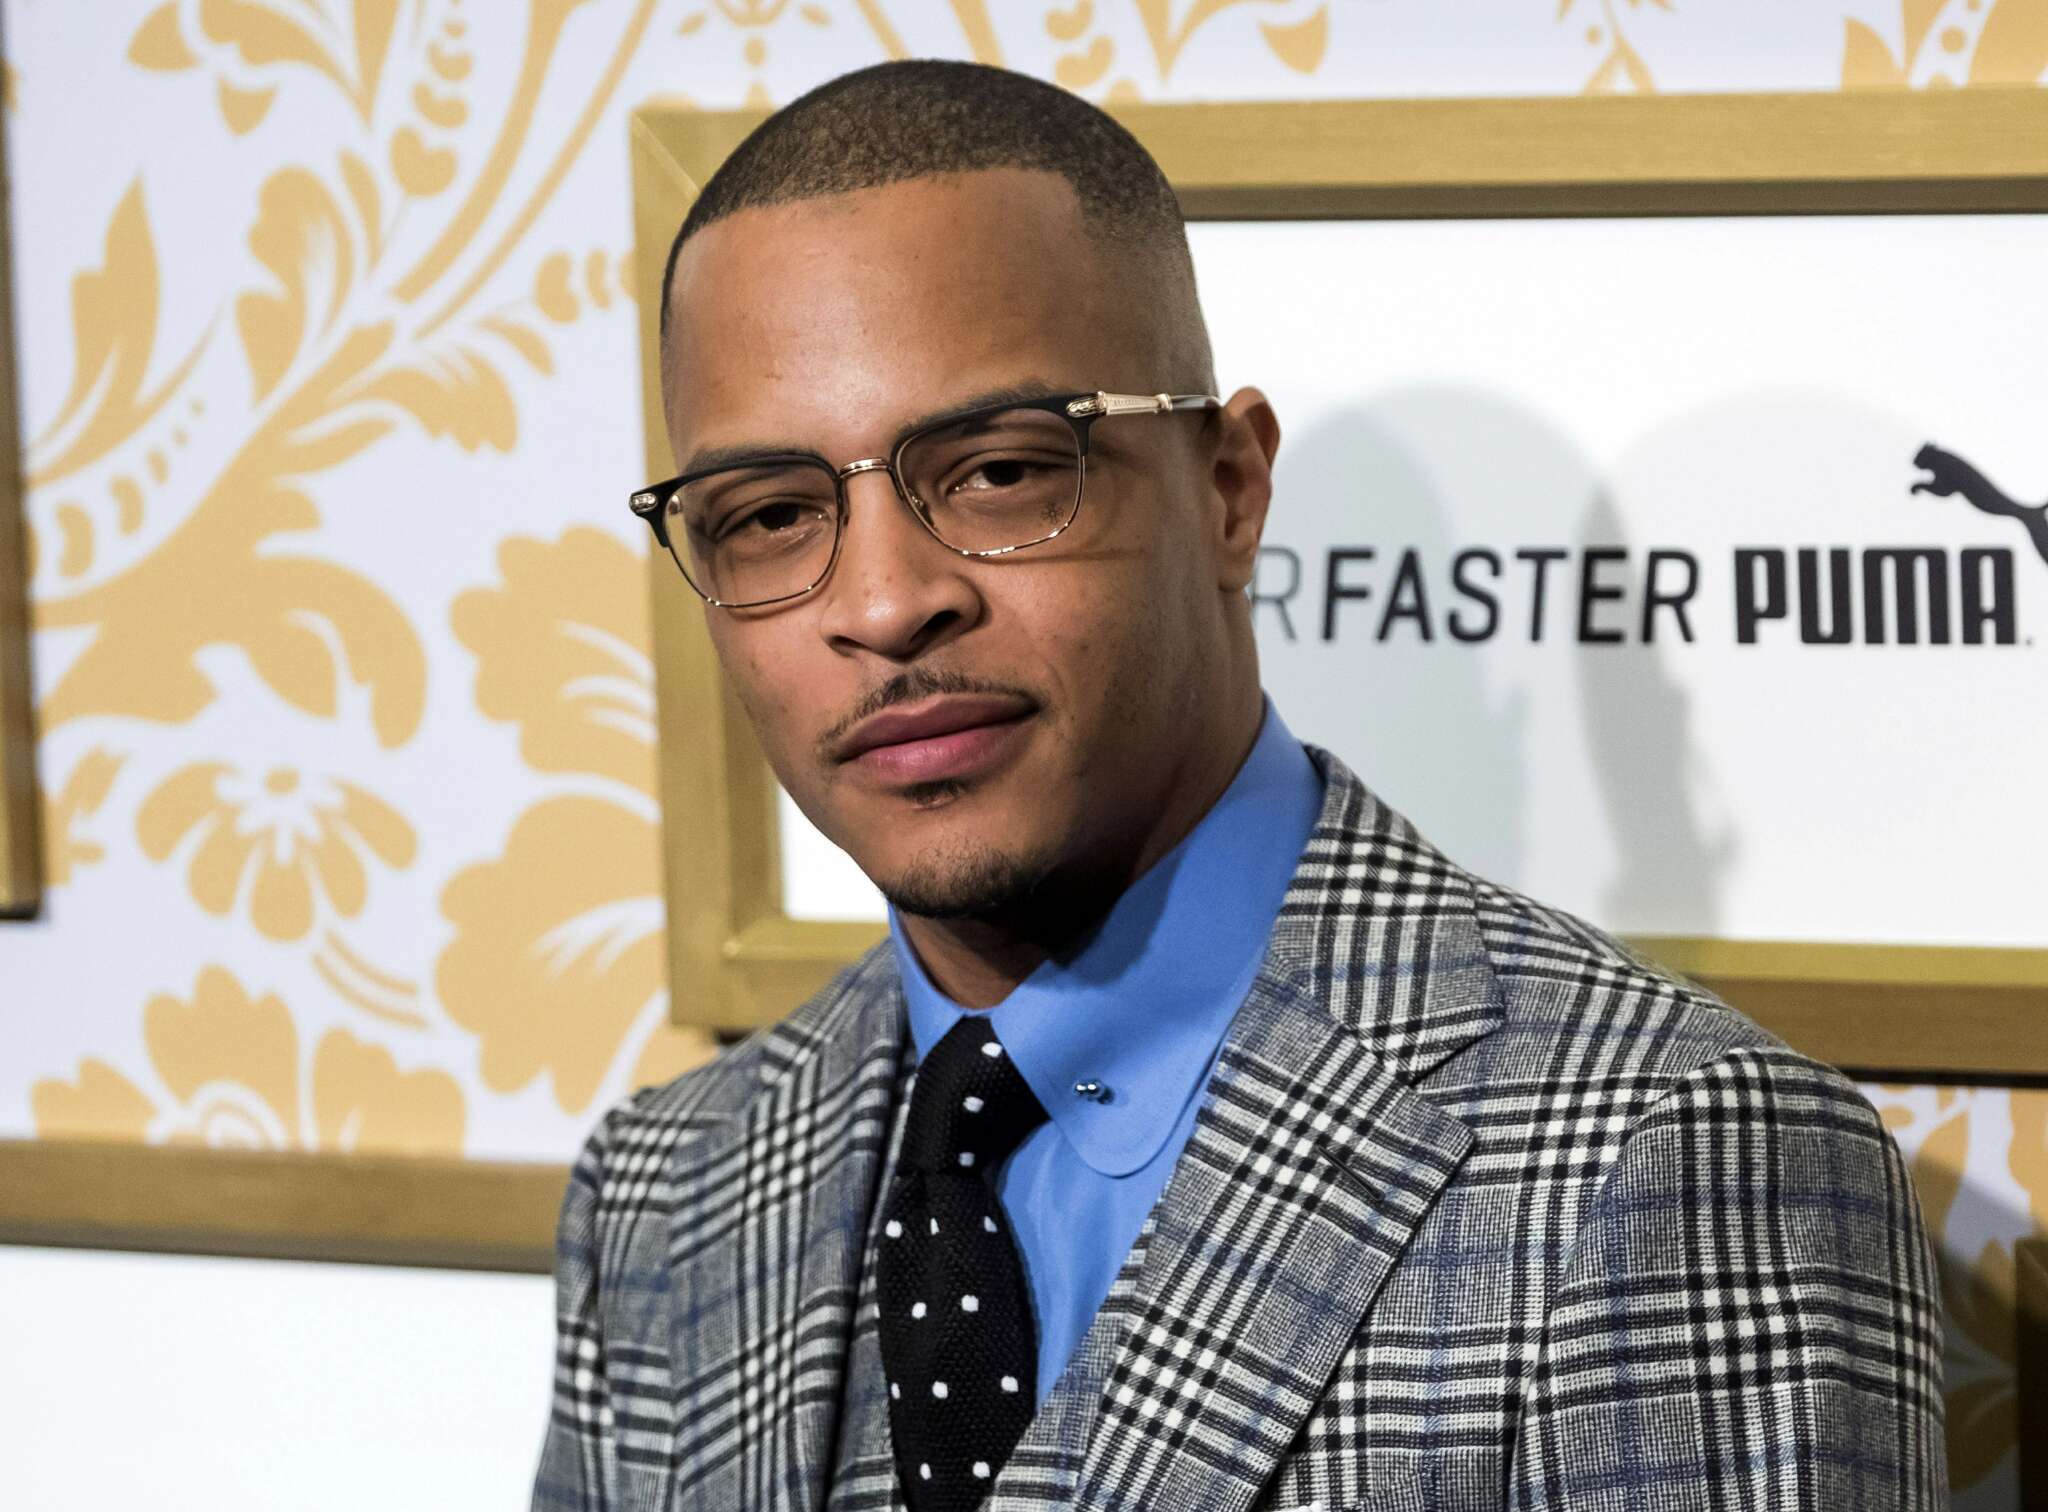 T.I. Triggers A Debate Among Fans Following The Video He Posted